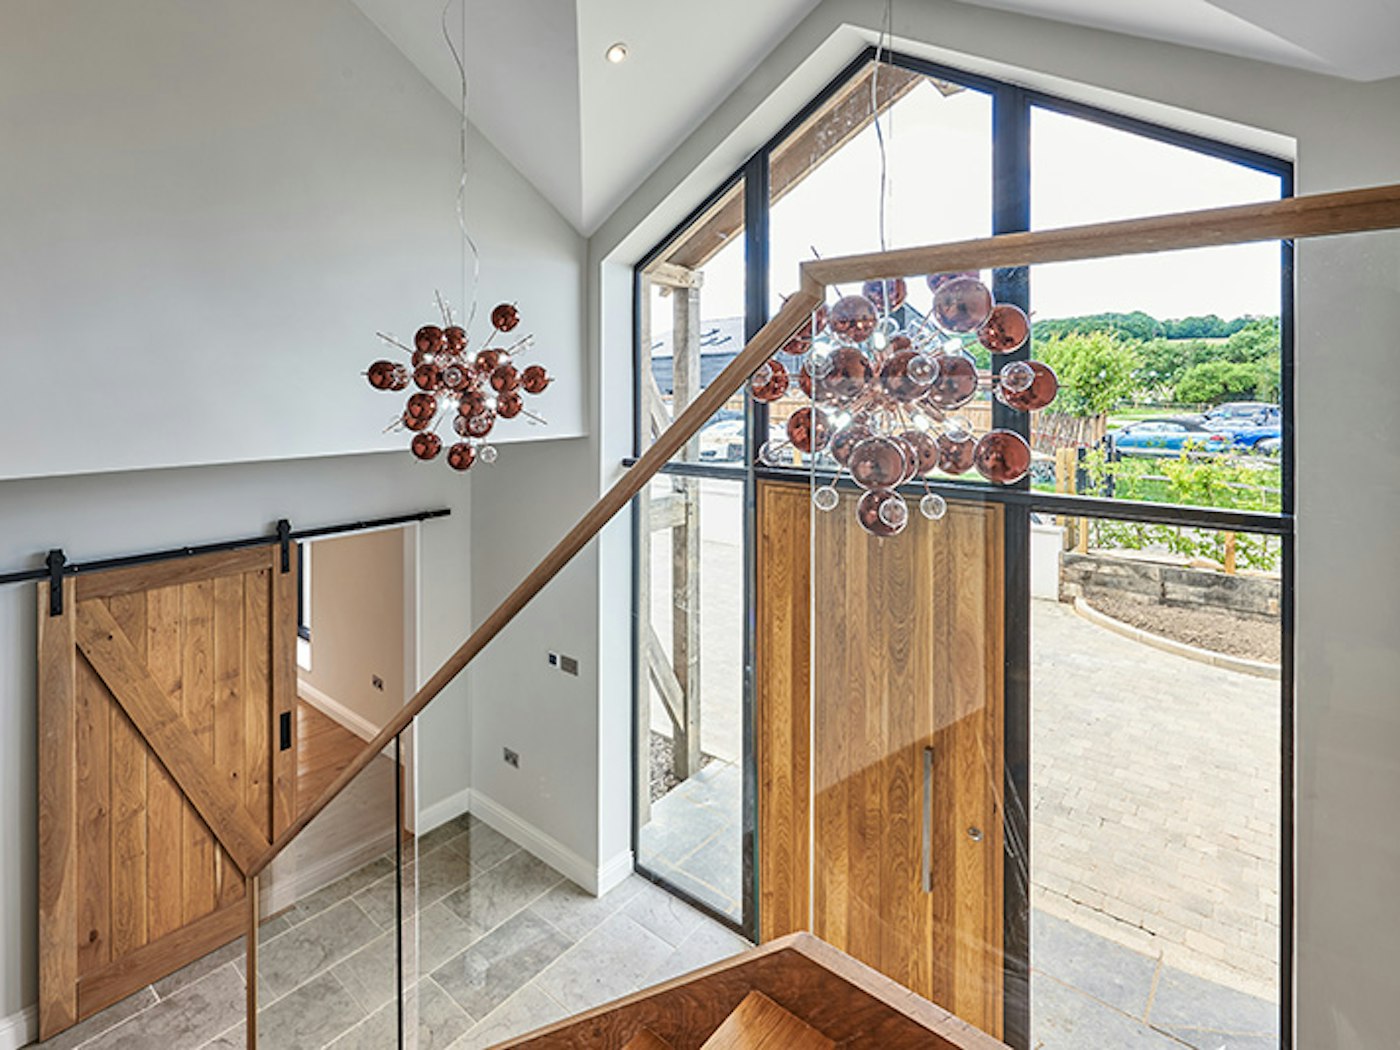 the front door and sliding barn door work really well in this barn conversion